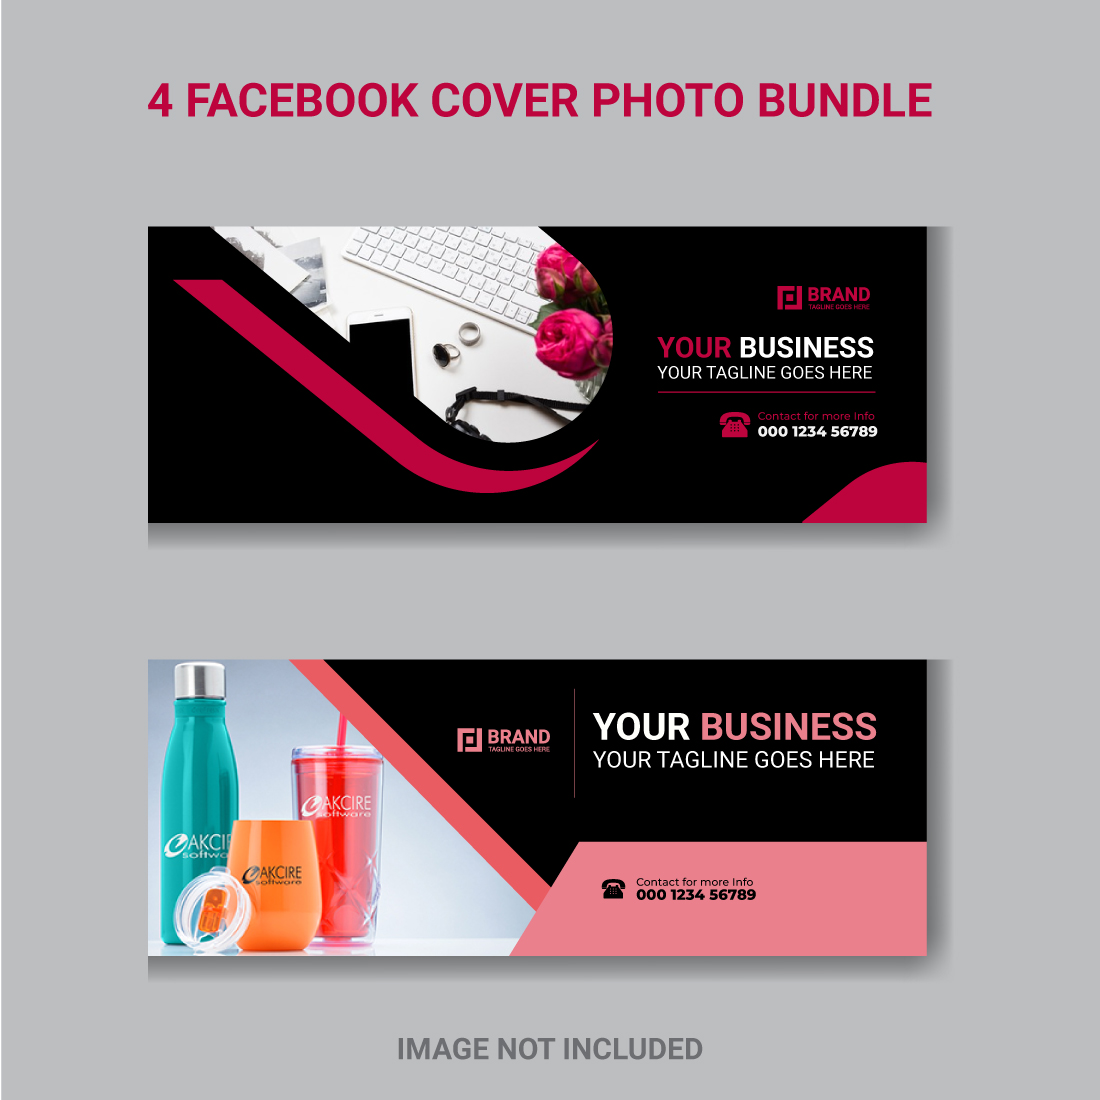 4 Facebook cover photo master bundle preview image.